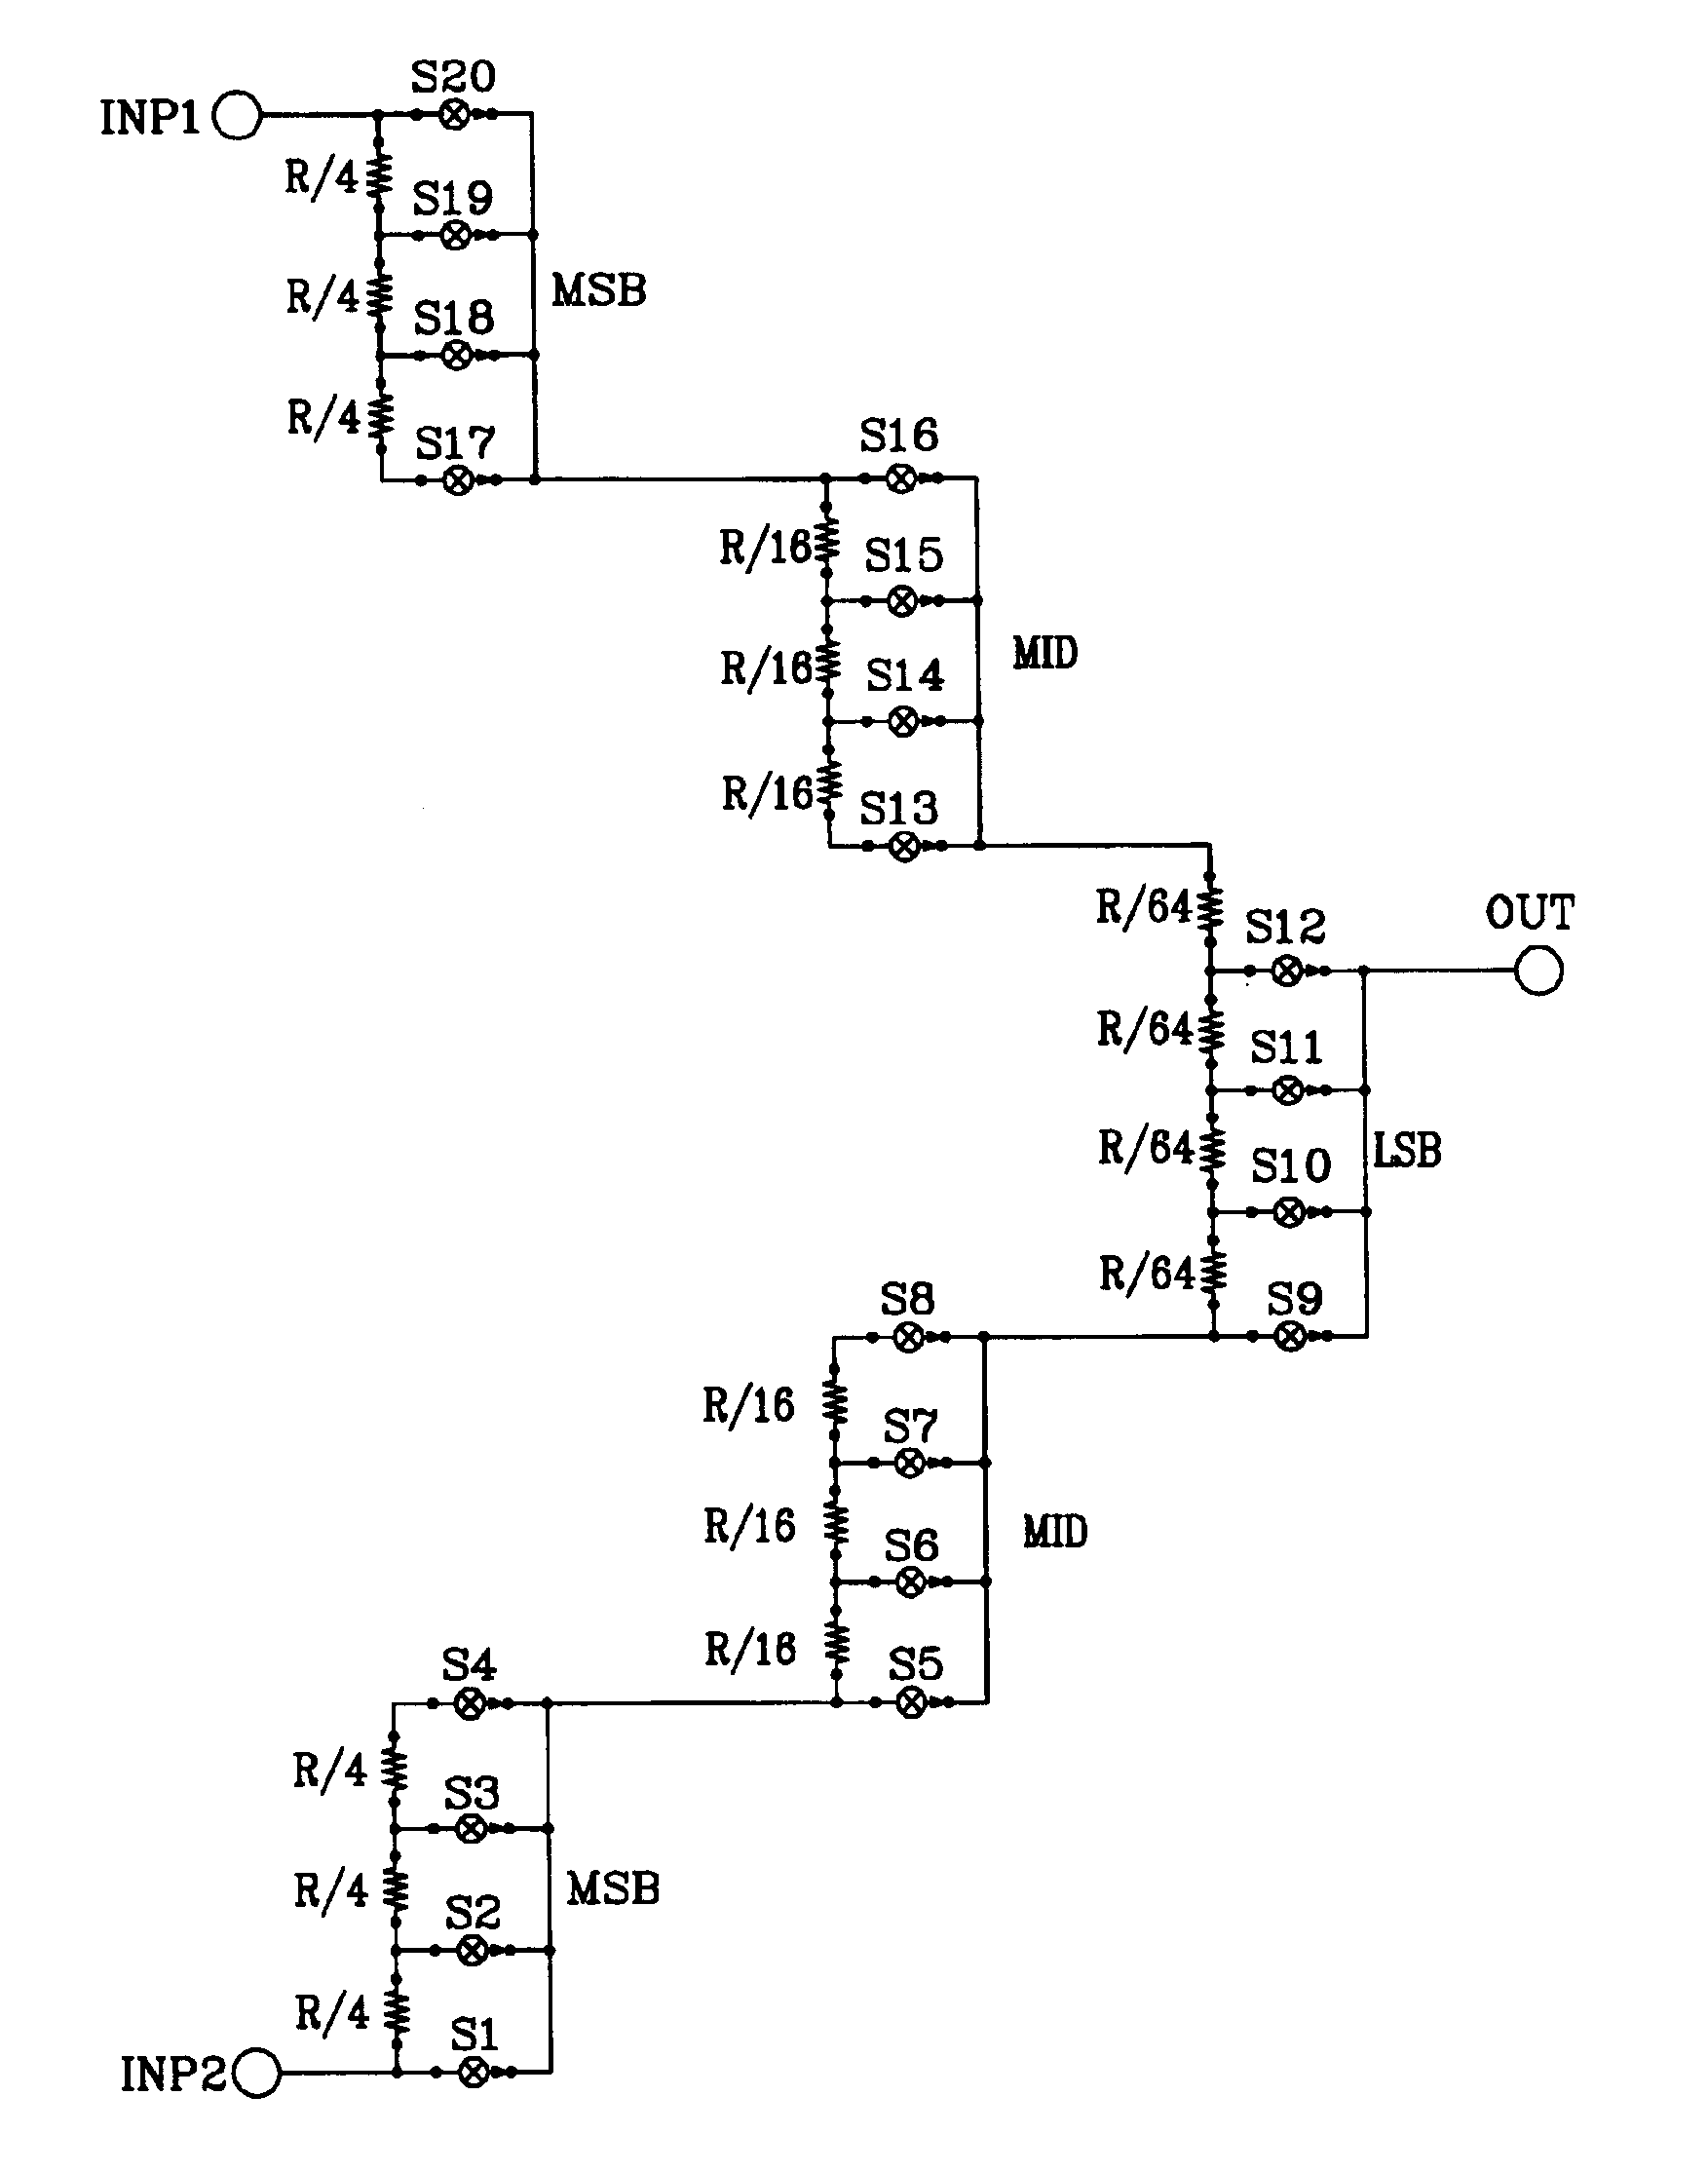 Digitally-switched impedance with multiple-stage segmented string architecture